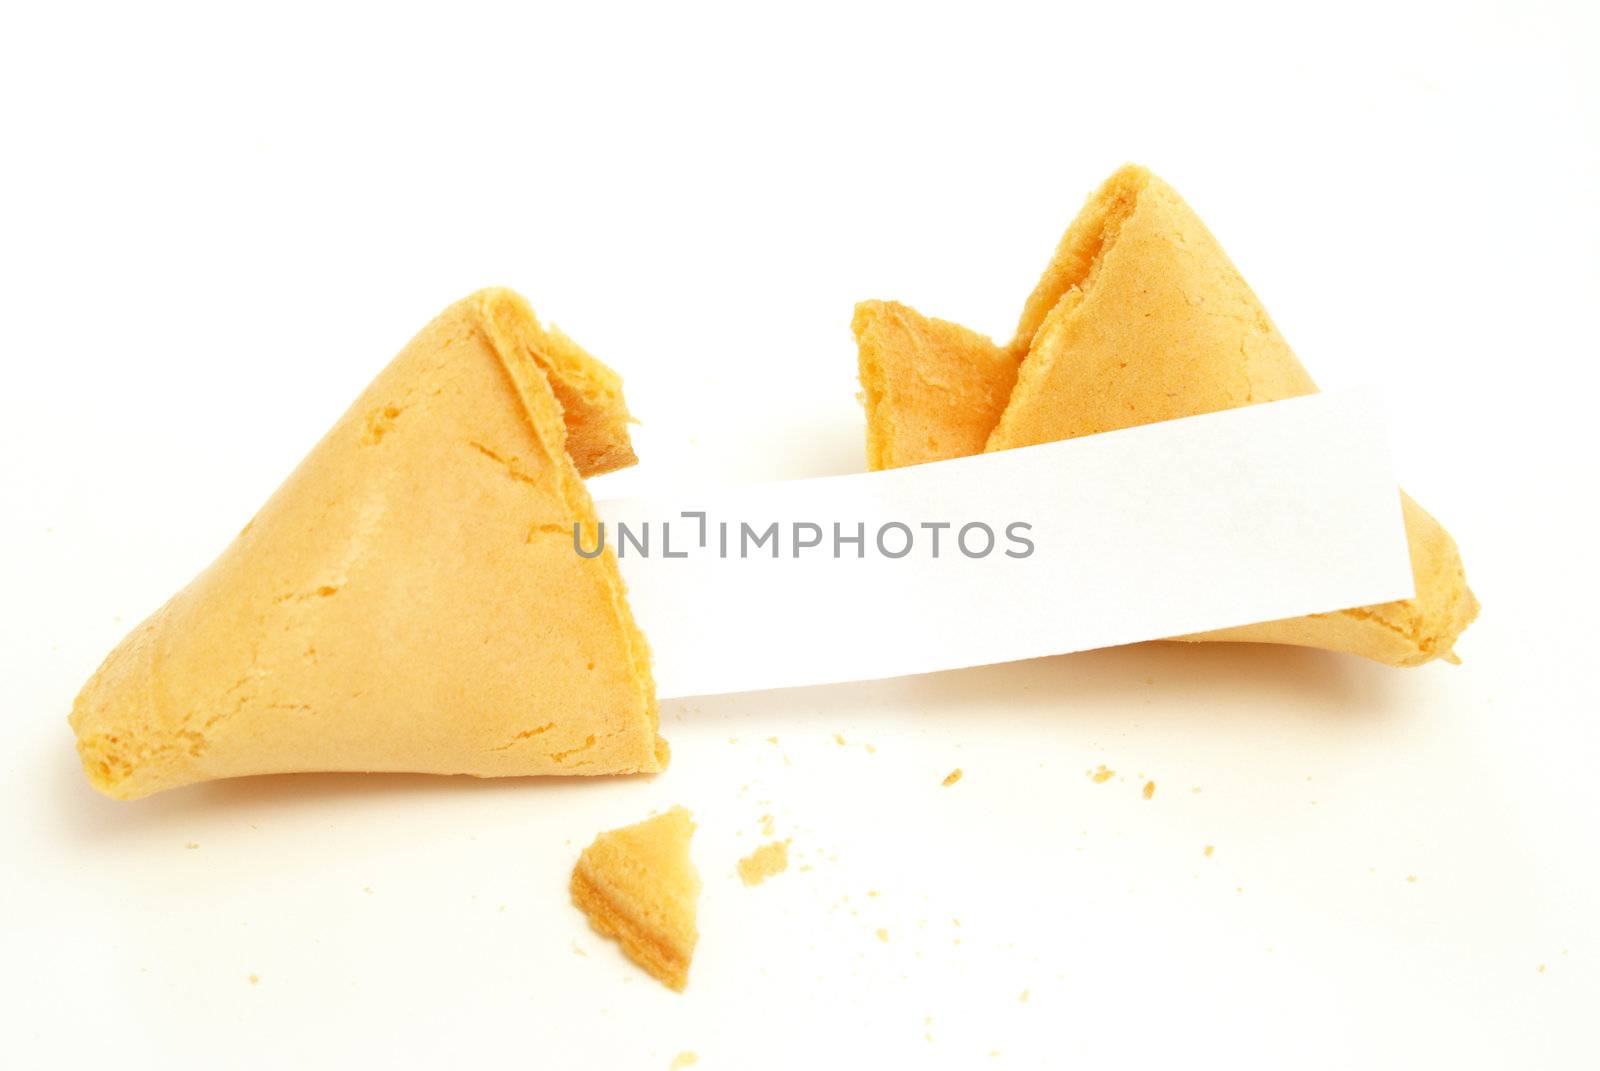 A fortune cookie on white background with a blank paper for your message.